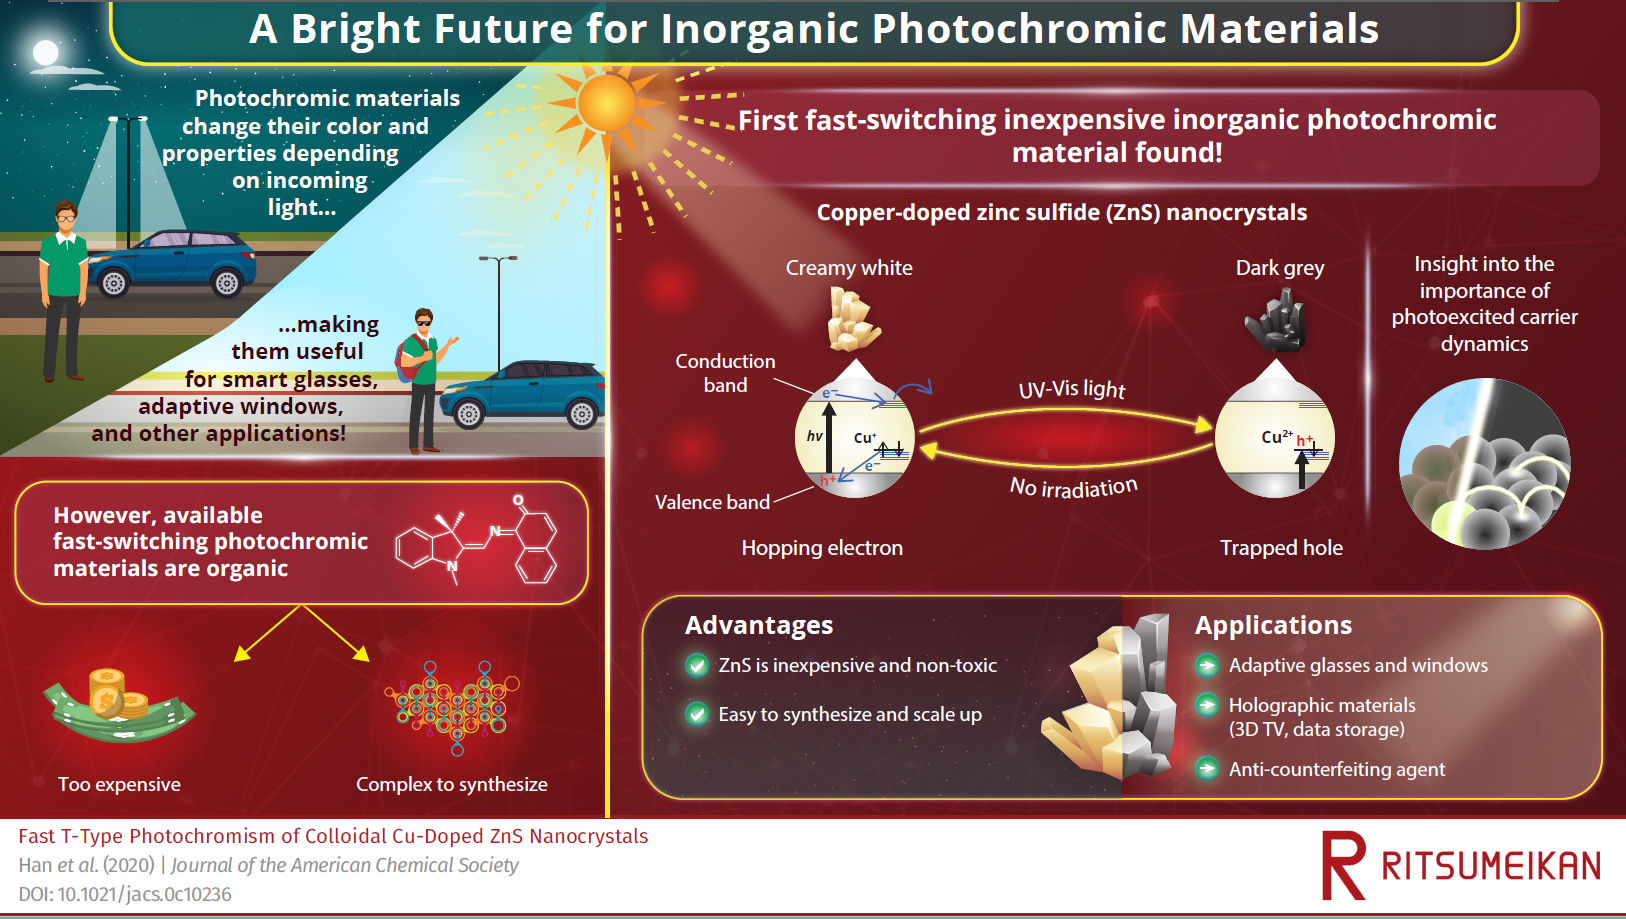 Fast Photochromism Discovered in an Inexpensive Inorganic Material